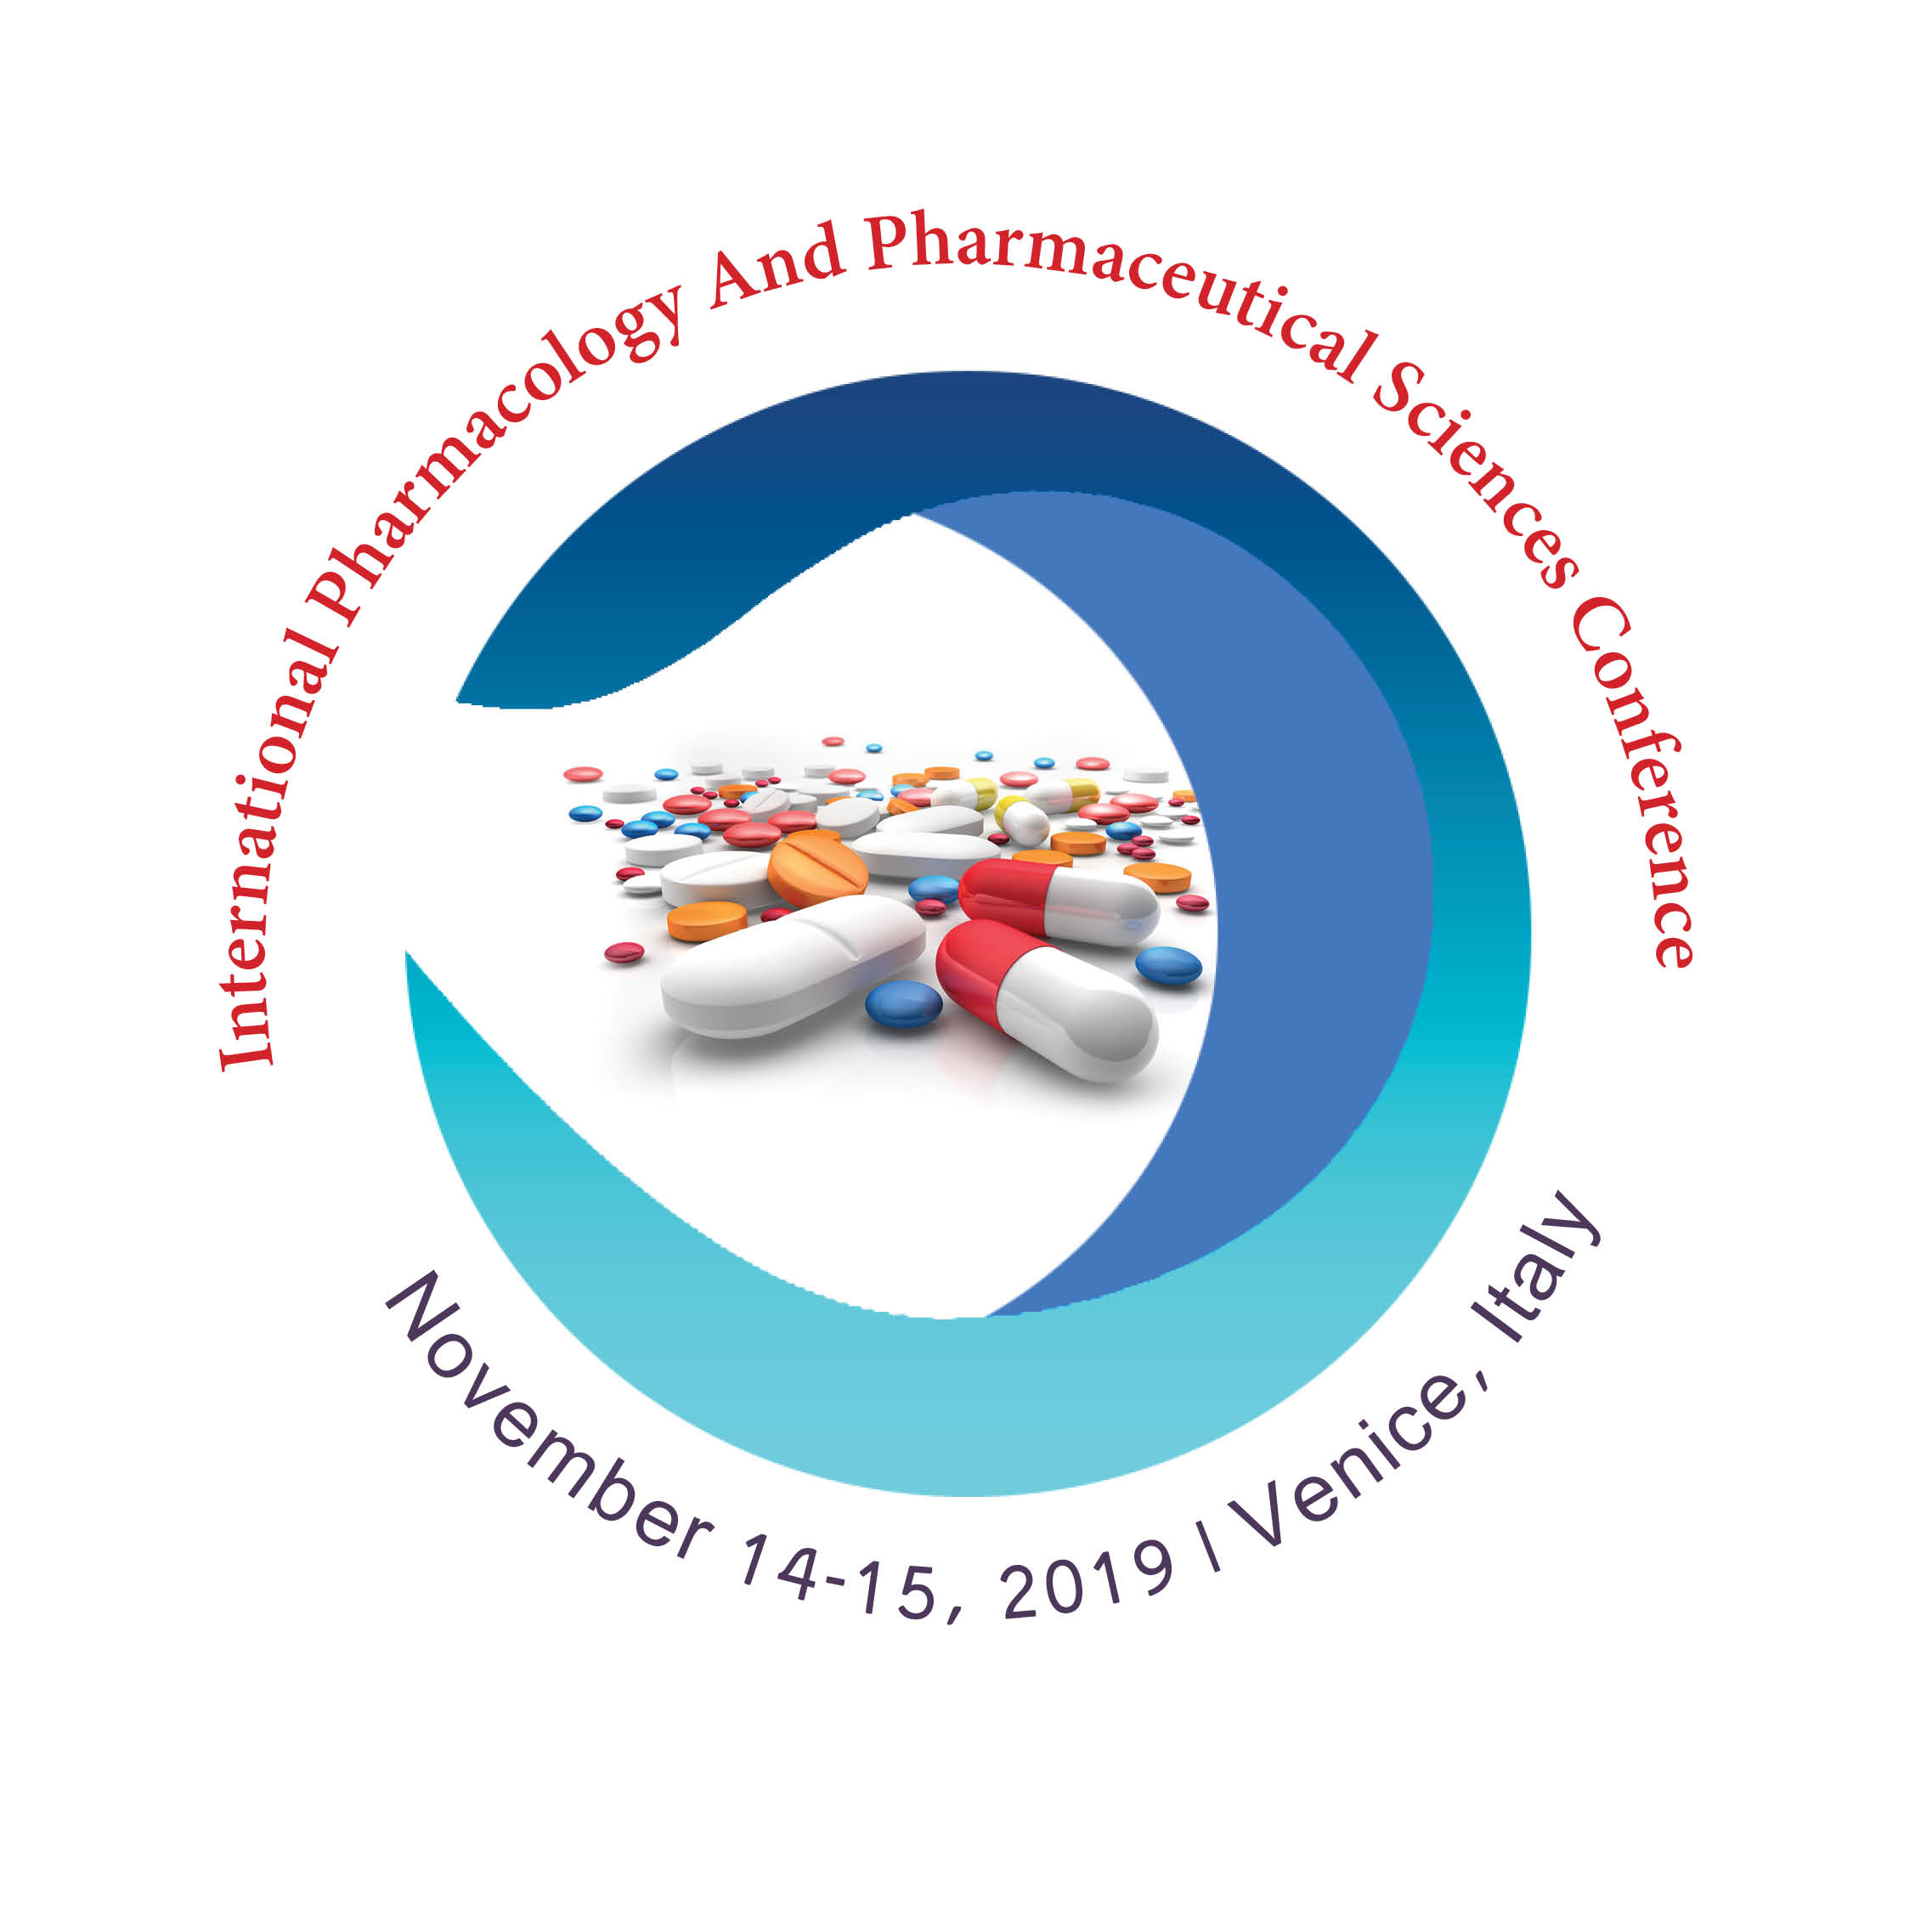 International Pharmacology and Pharmaceutical Sciences conference